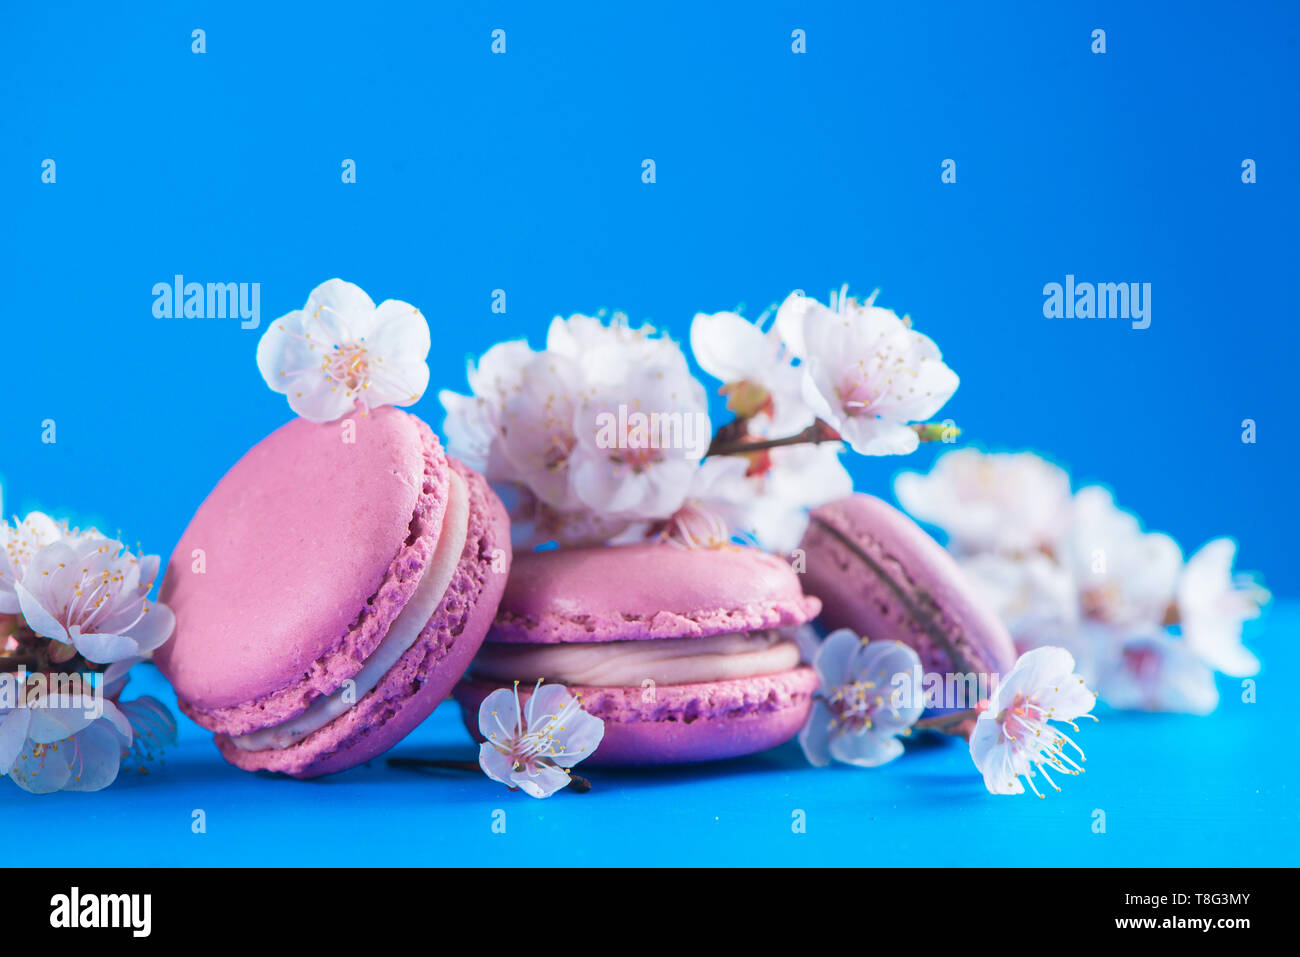 French macaron cookies header with cherry blossom flowers on a sky blue background with copy space. Color pop Stock Photo